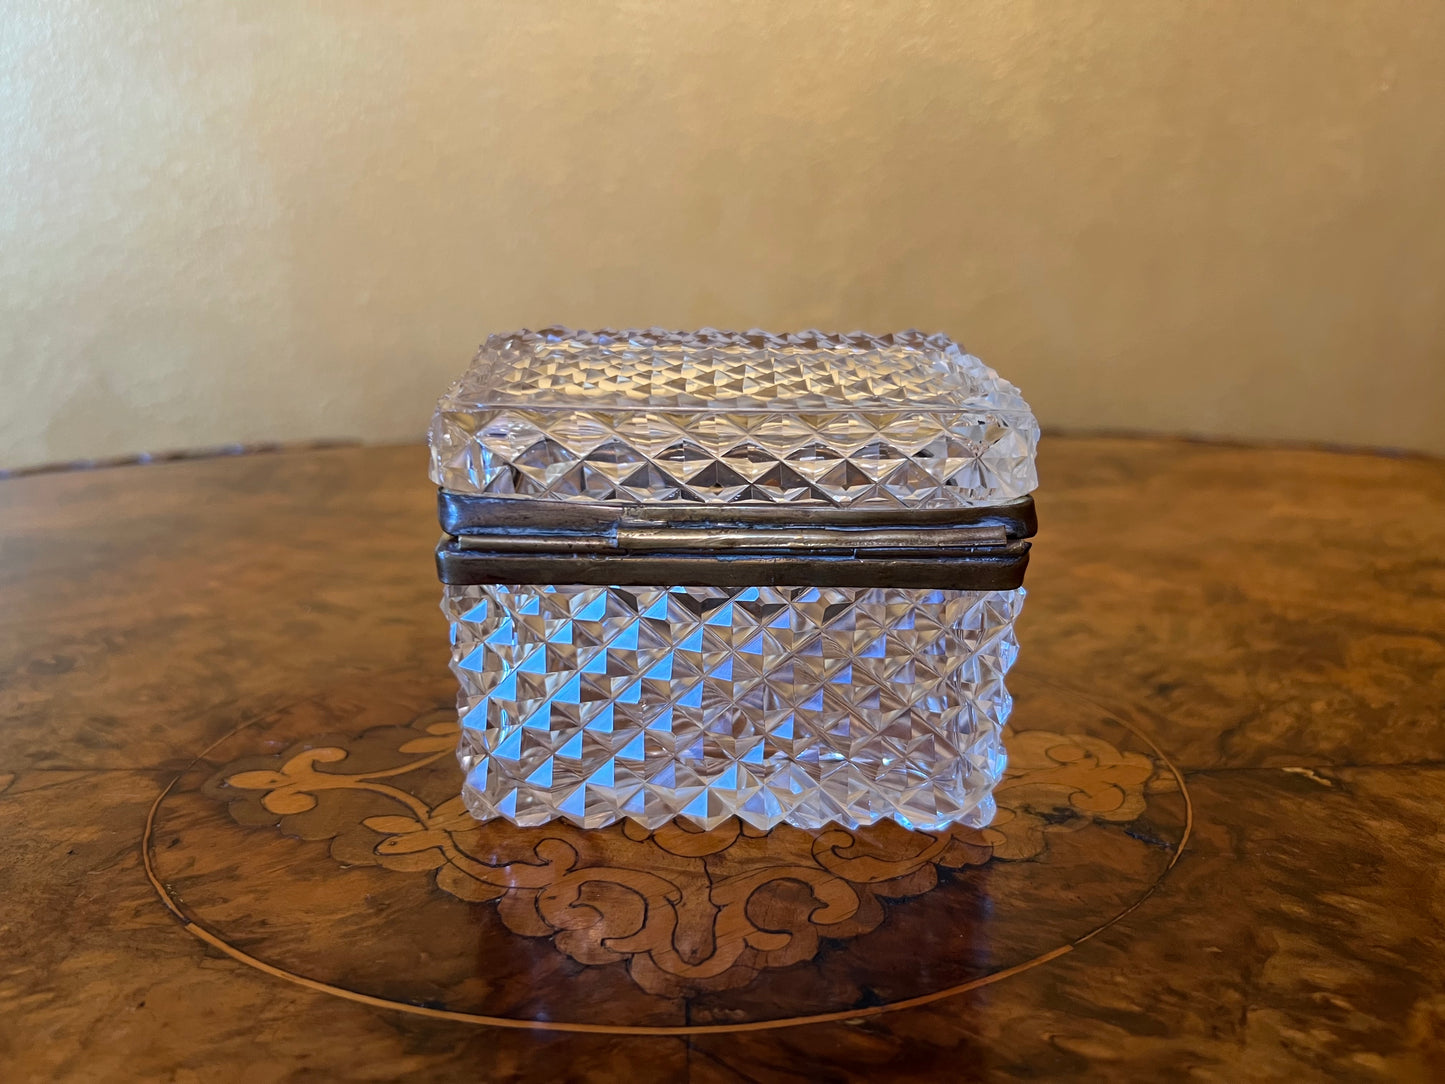 Antique French Baccarat Crystal Trinket Box